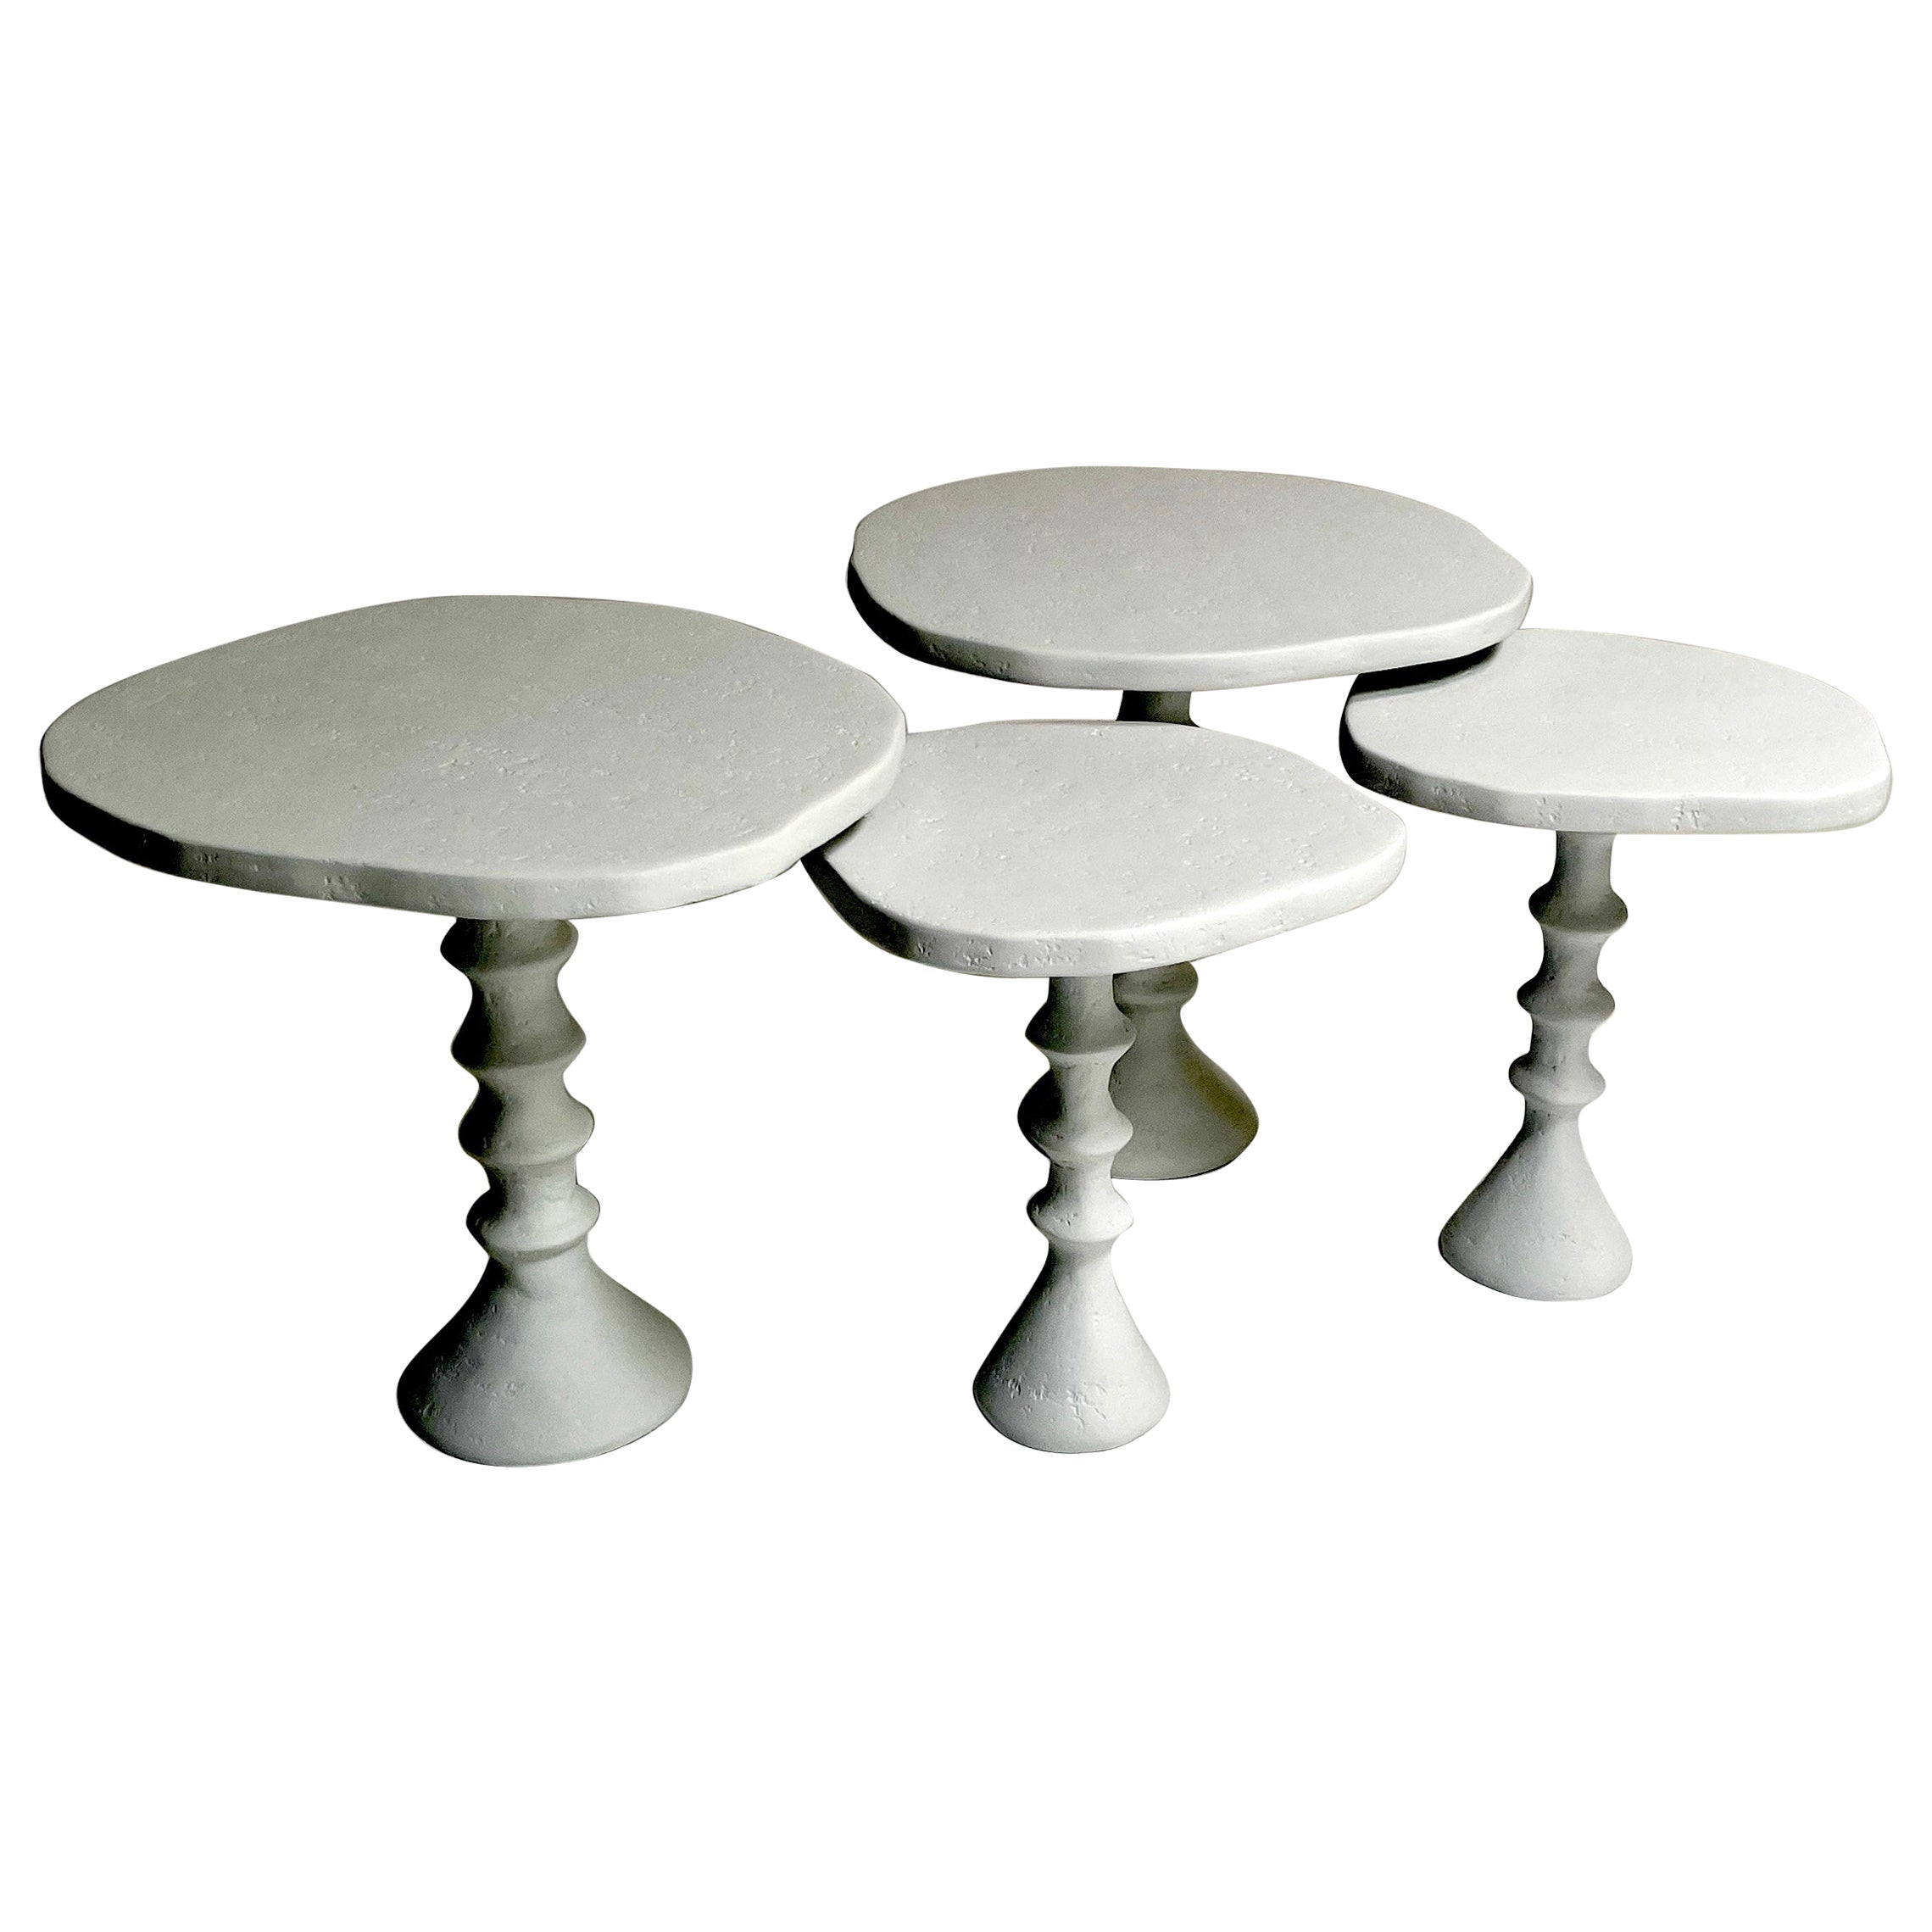 Set of Four Plaster St Paul Side Tables by Bourgeois Boheme Atelier